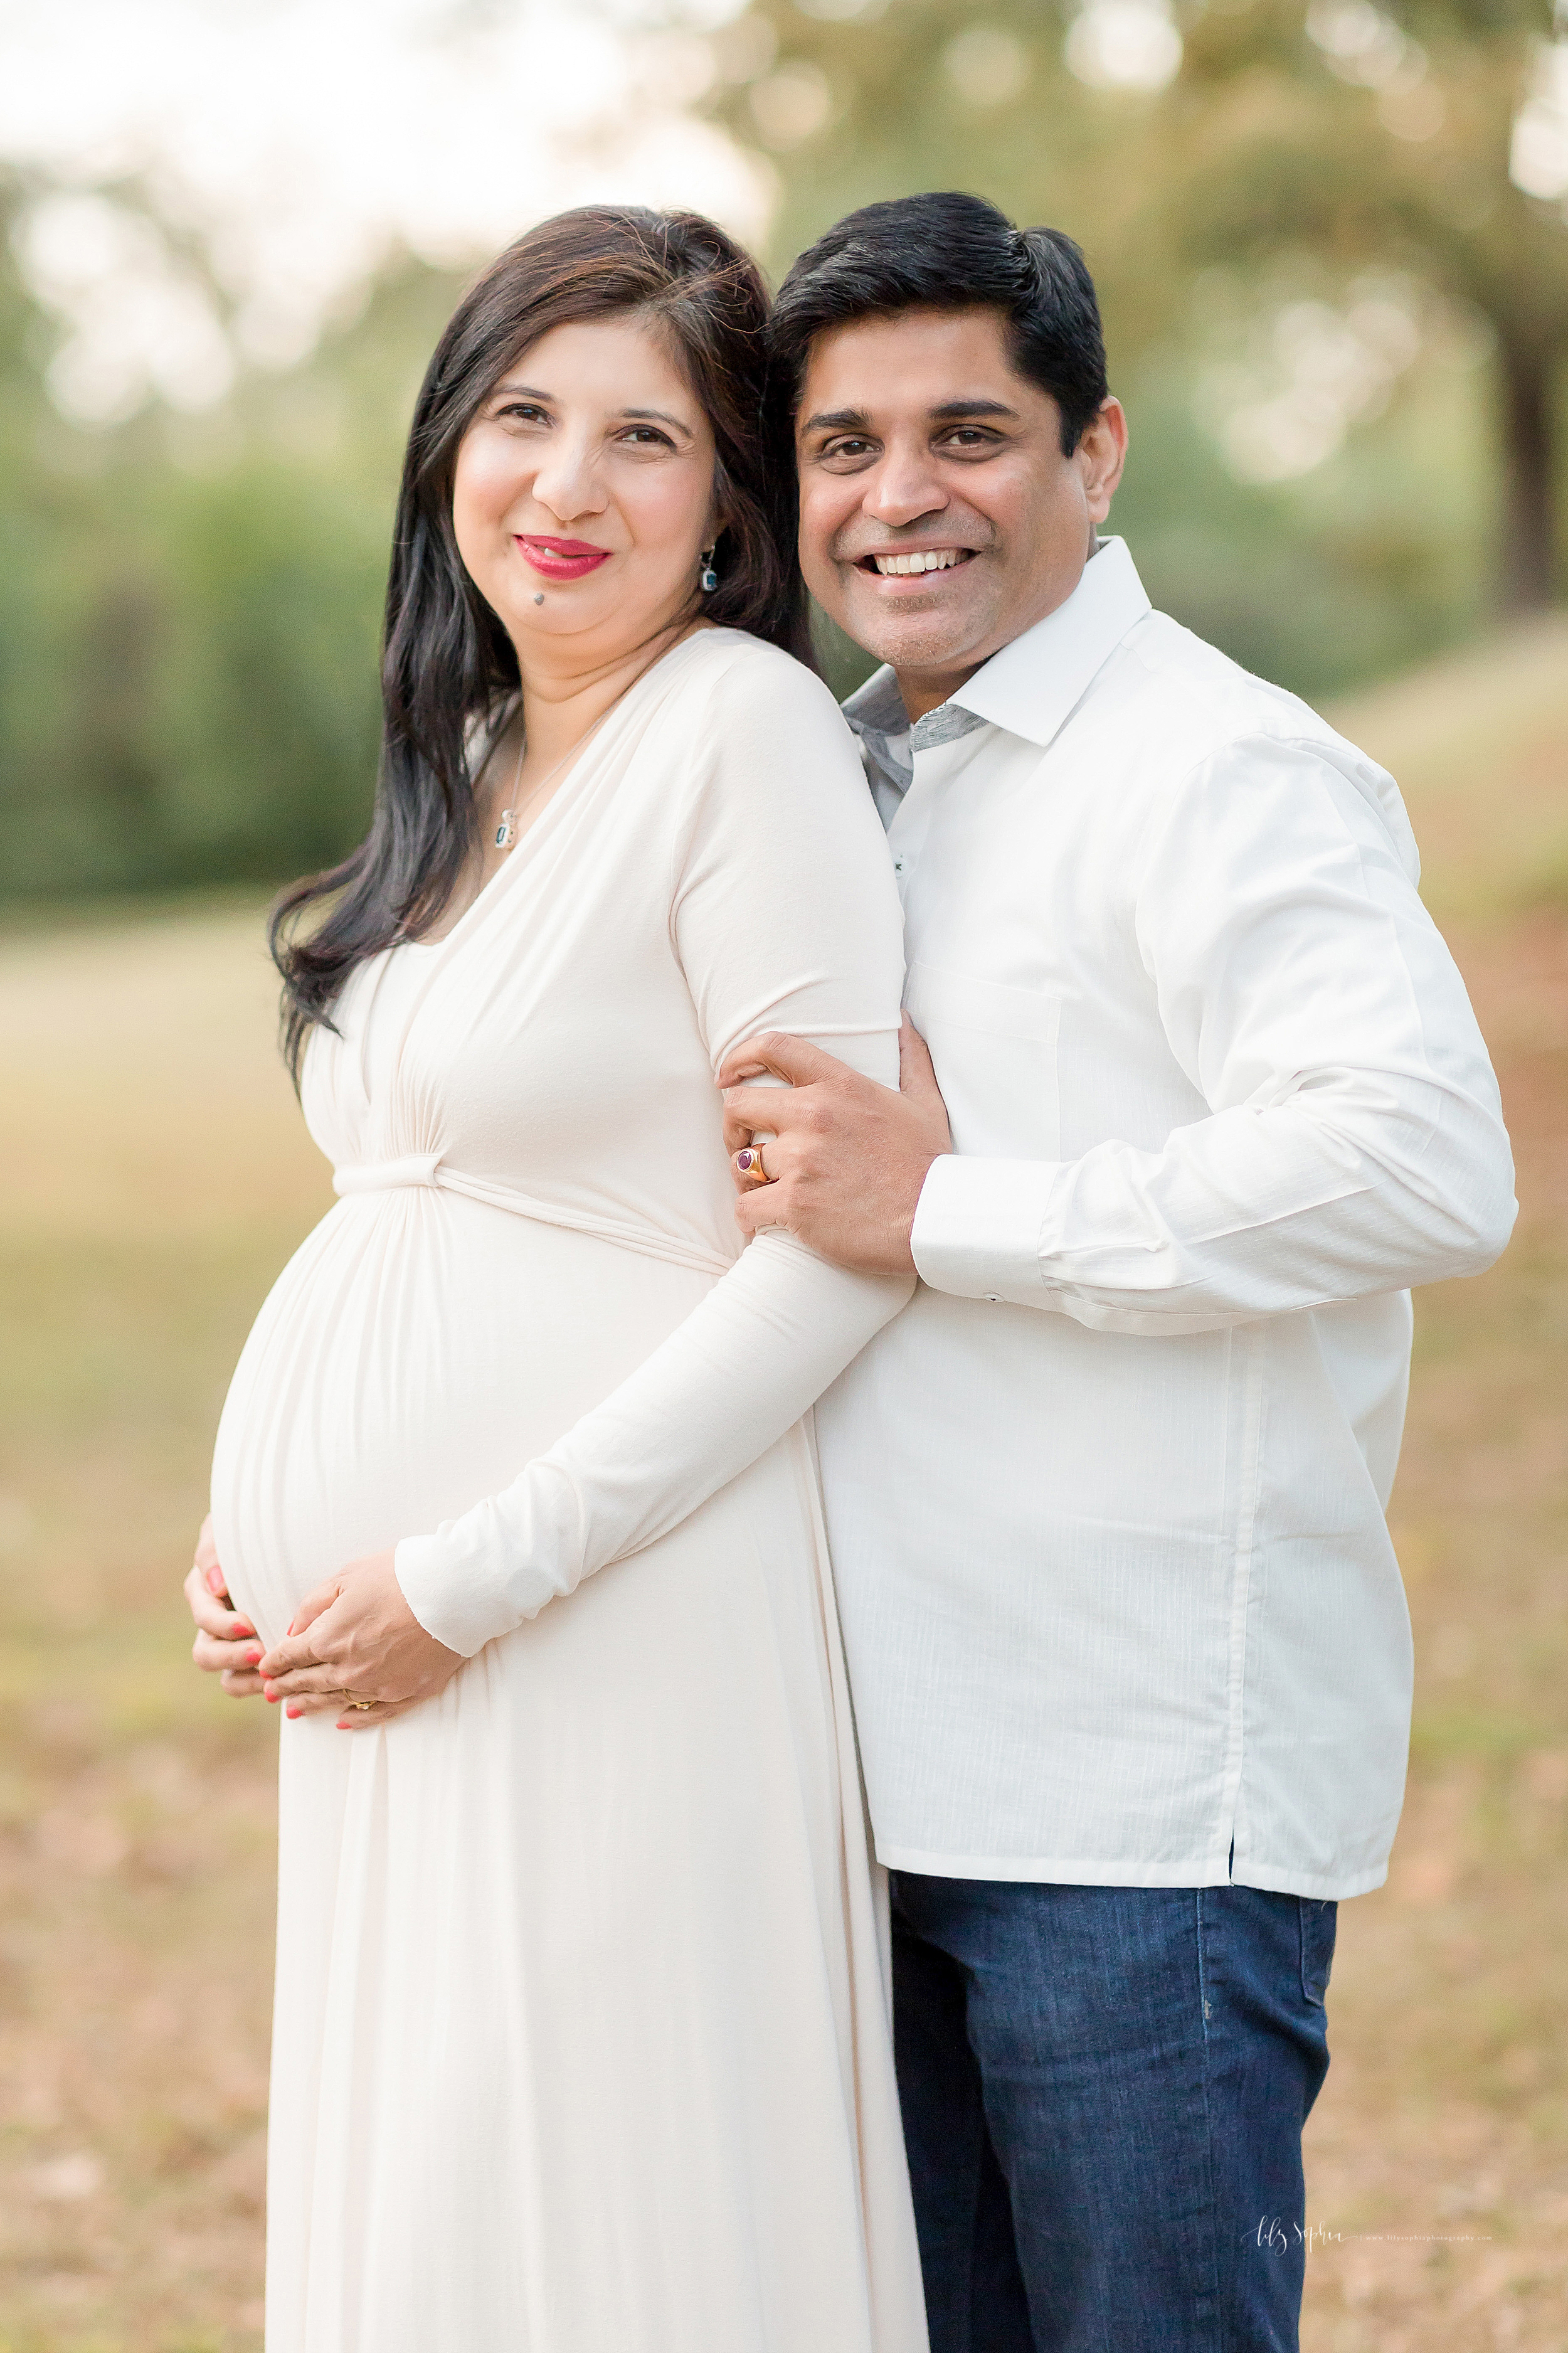 atlanta-midtown-lawrenceville-decatur-lily-sophia-photography-photographer-indian-couple-maternity-photos-expecting-baby-girl_0197.jpg